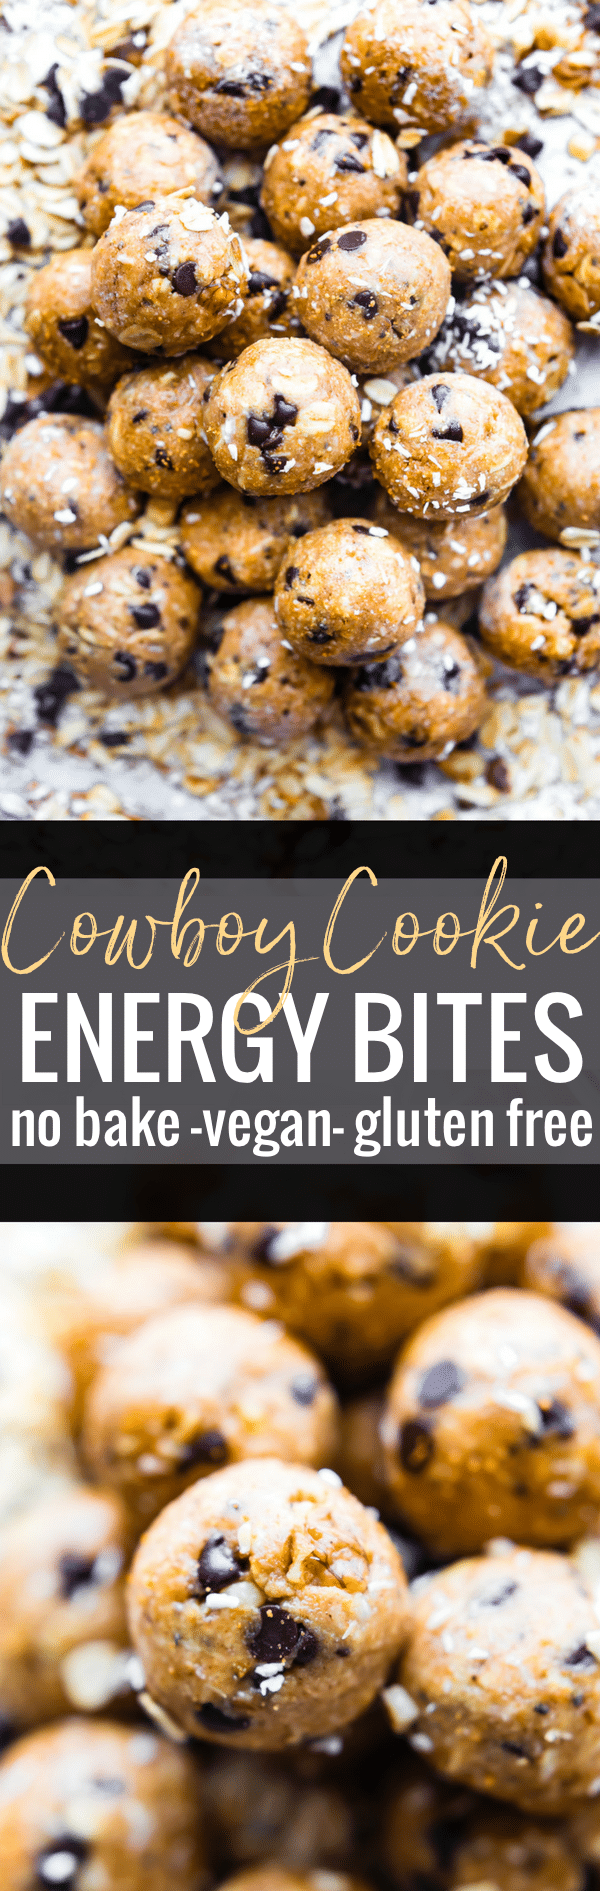 Cowboy Cookies in a no bake ENERGY BITES form! Yes, the best of both worlds. No baking, vegan energy bites that taste like cowboy cookies! Soft, chewy, and loaded with a variety of flavors. Oats, dark chocolate chips, coconut, almond or peanut butter, maple syrup, chopped walnuts, and a hint of cinnamon coconut sugar www.cottercrunch.com